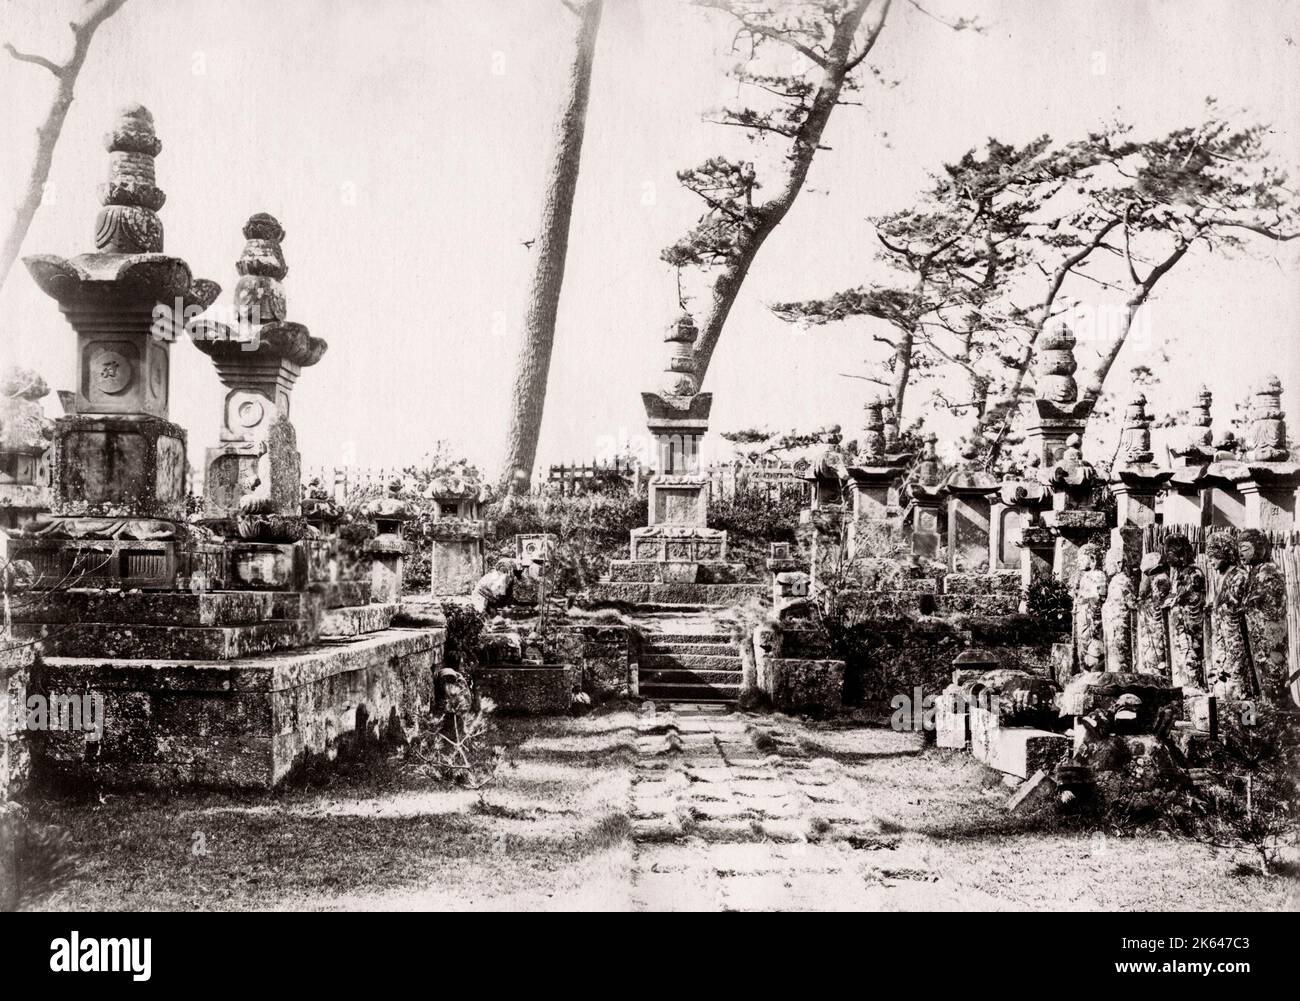 1870's Japan - graveyard of high-ranking officials - from 'The Far East' magazine Stock Photo